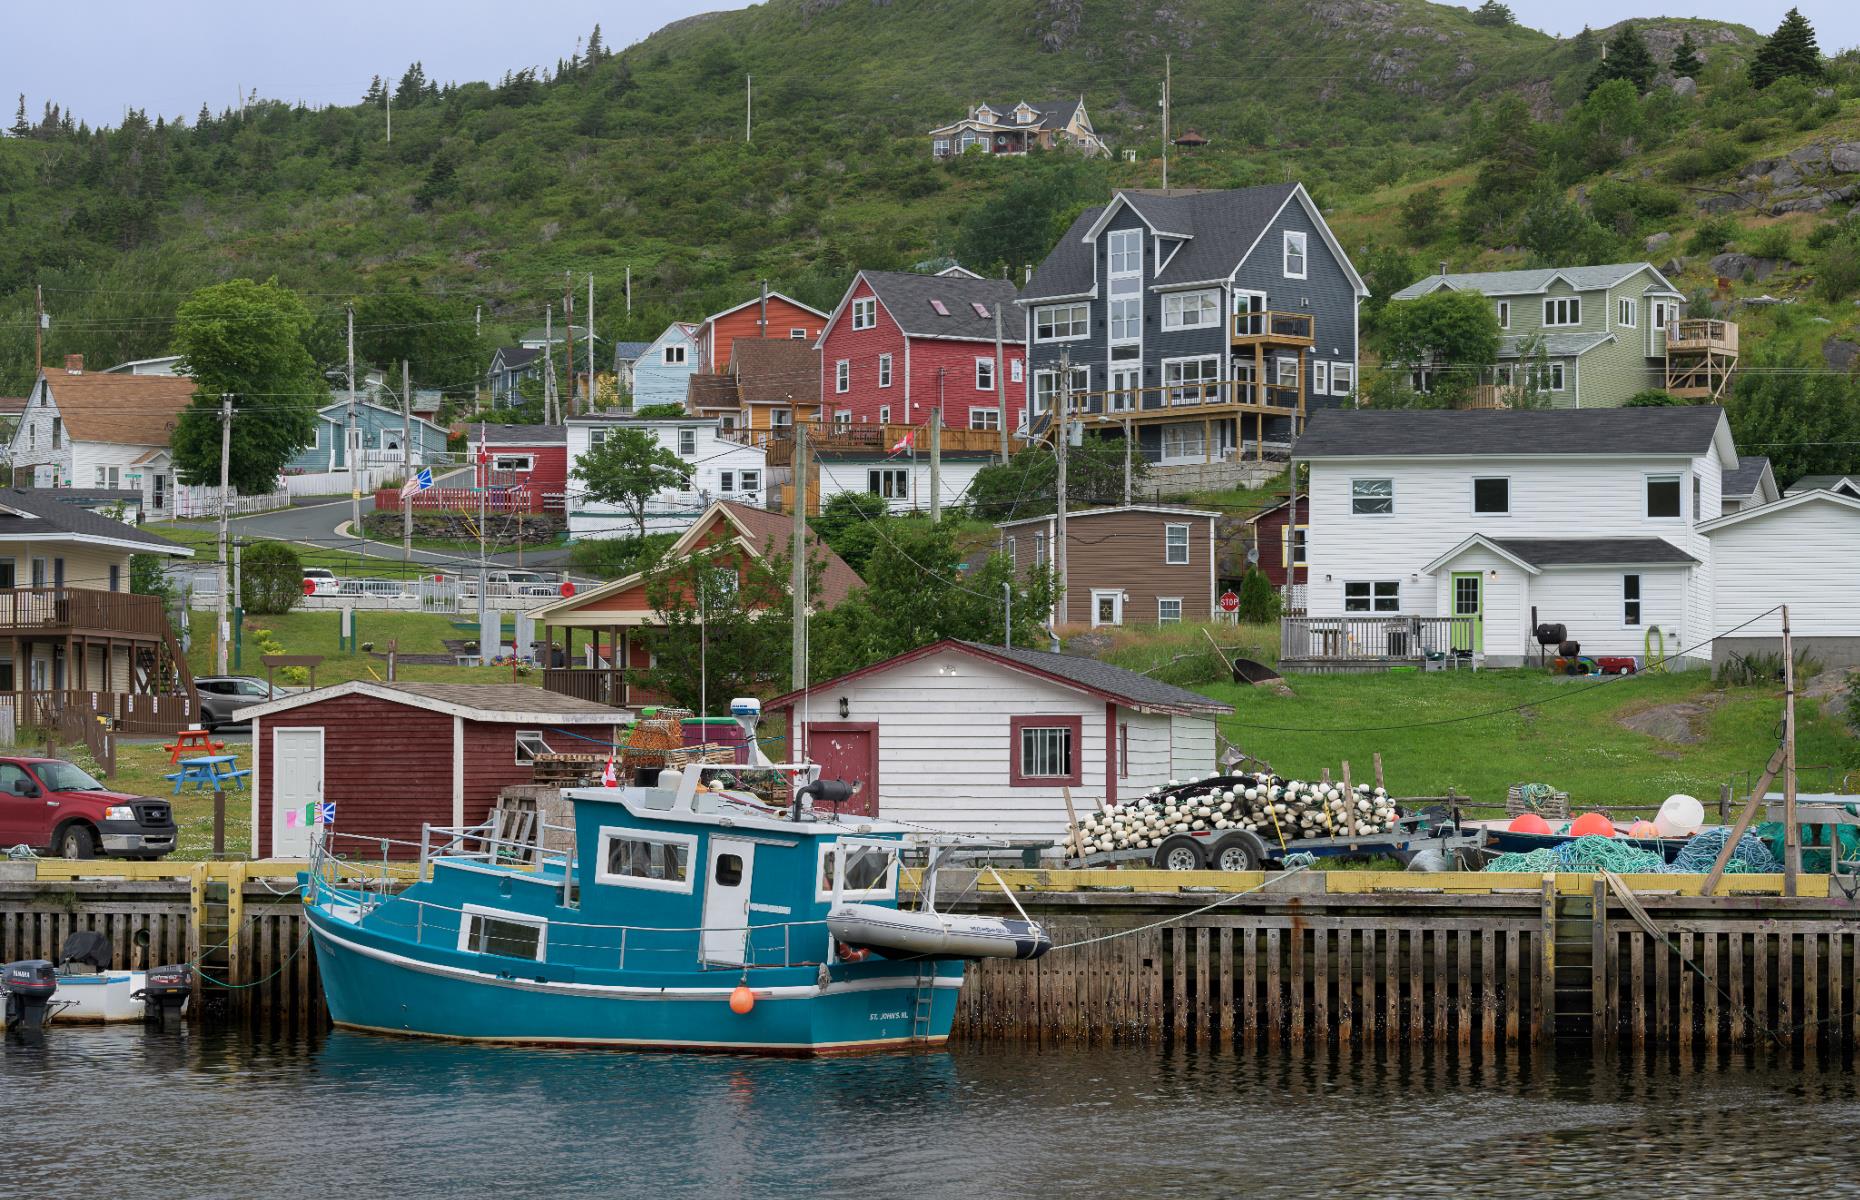 <p>The small town of Petty Harbour-Maddox Cove is just 15 minutes south of St John’s and is also a short jaunt to Cape Spear, the most easterly point in North America. It was one of the earliest landing points when European settlers came to North America, predating the Mayflower. Fishing is both the historic and current industry in the area, with cod and snow crab fisheries still active.</p>